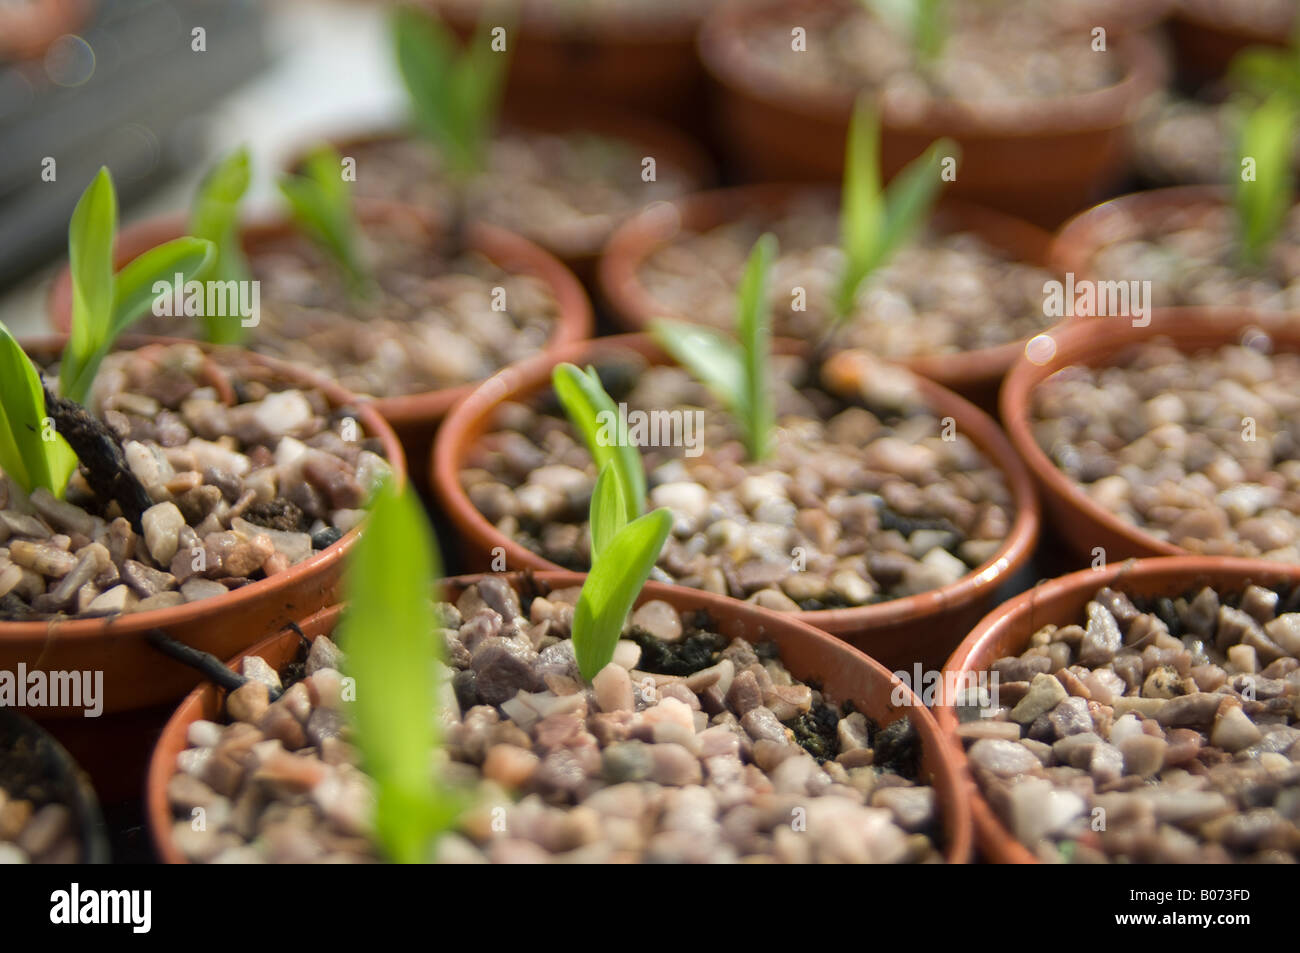 Rows of sweetcorn plant seedlings growing in plant pots in glasshouse Stock Photo